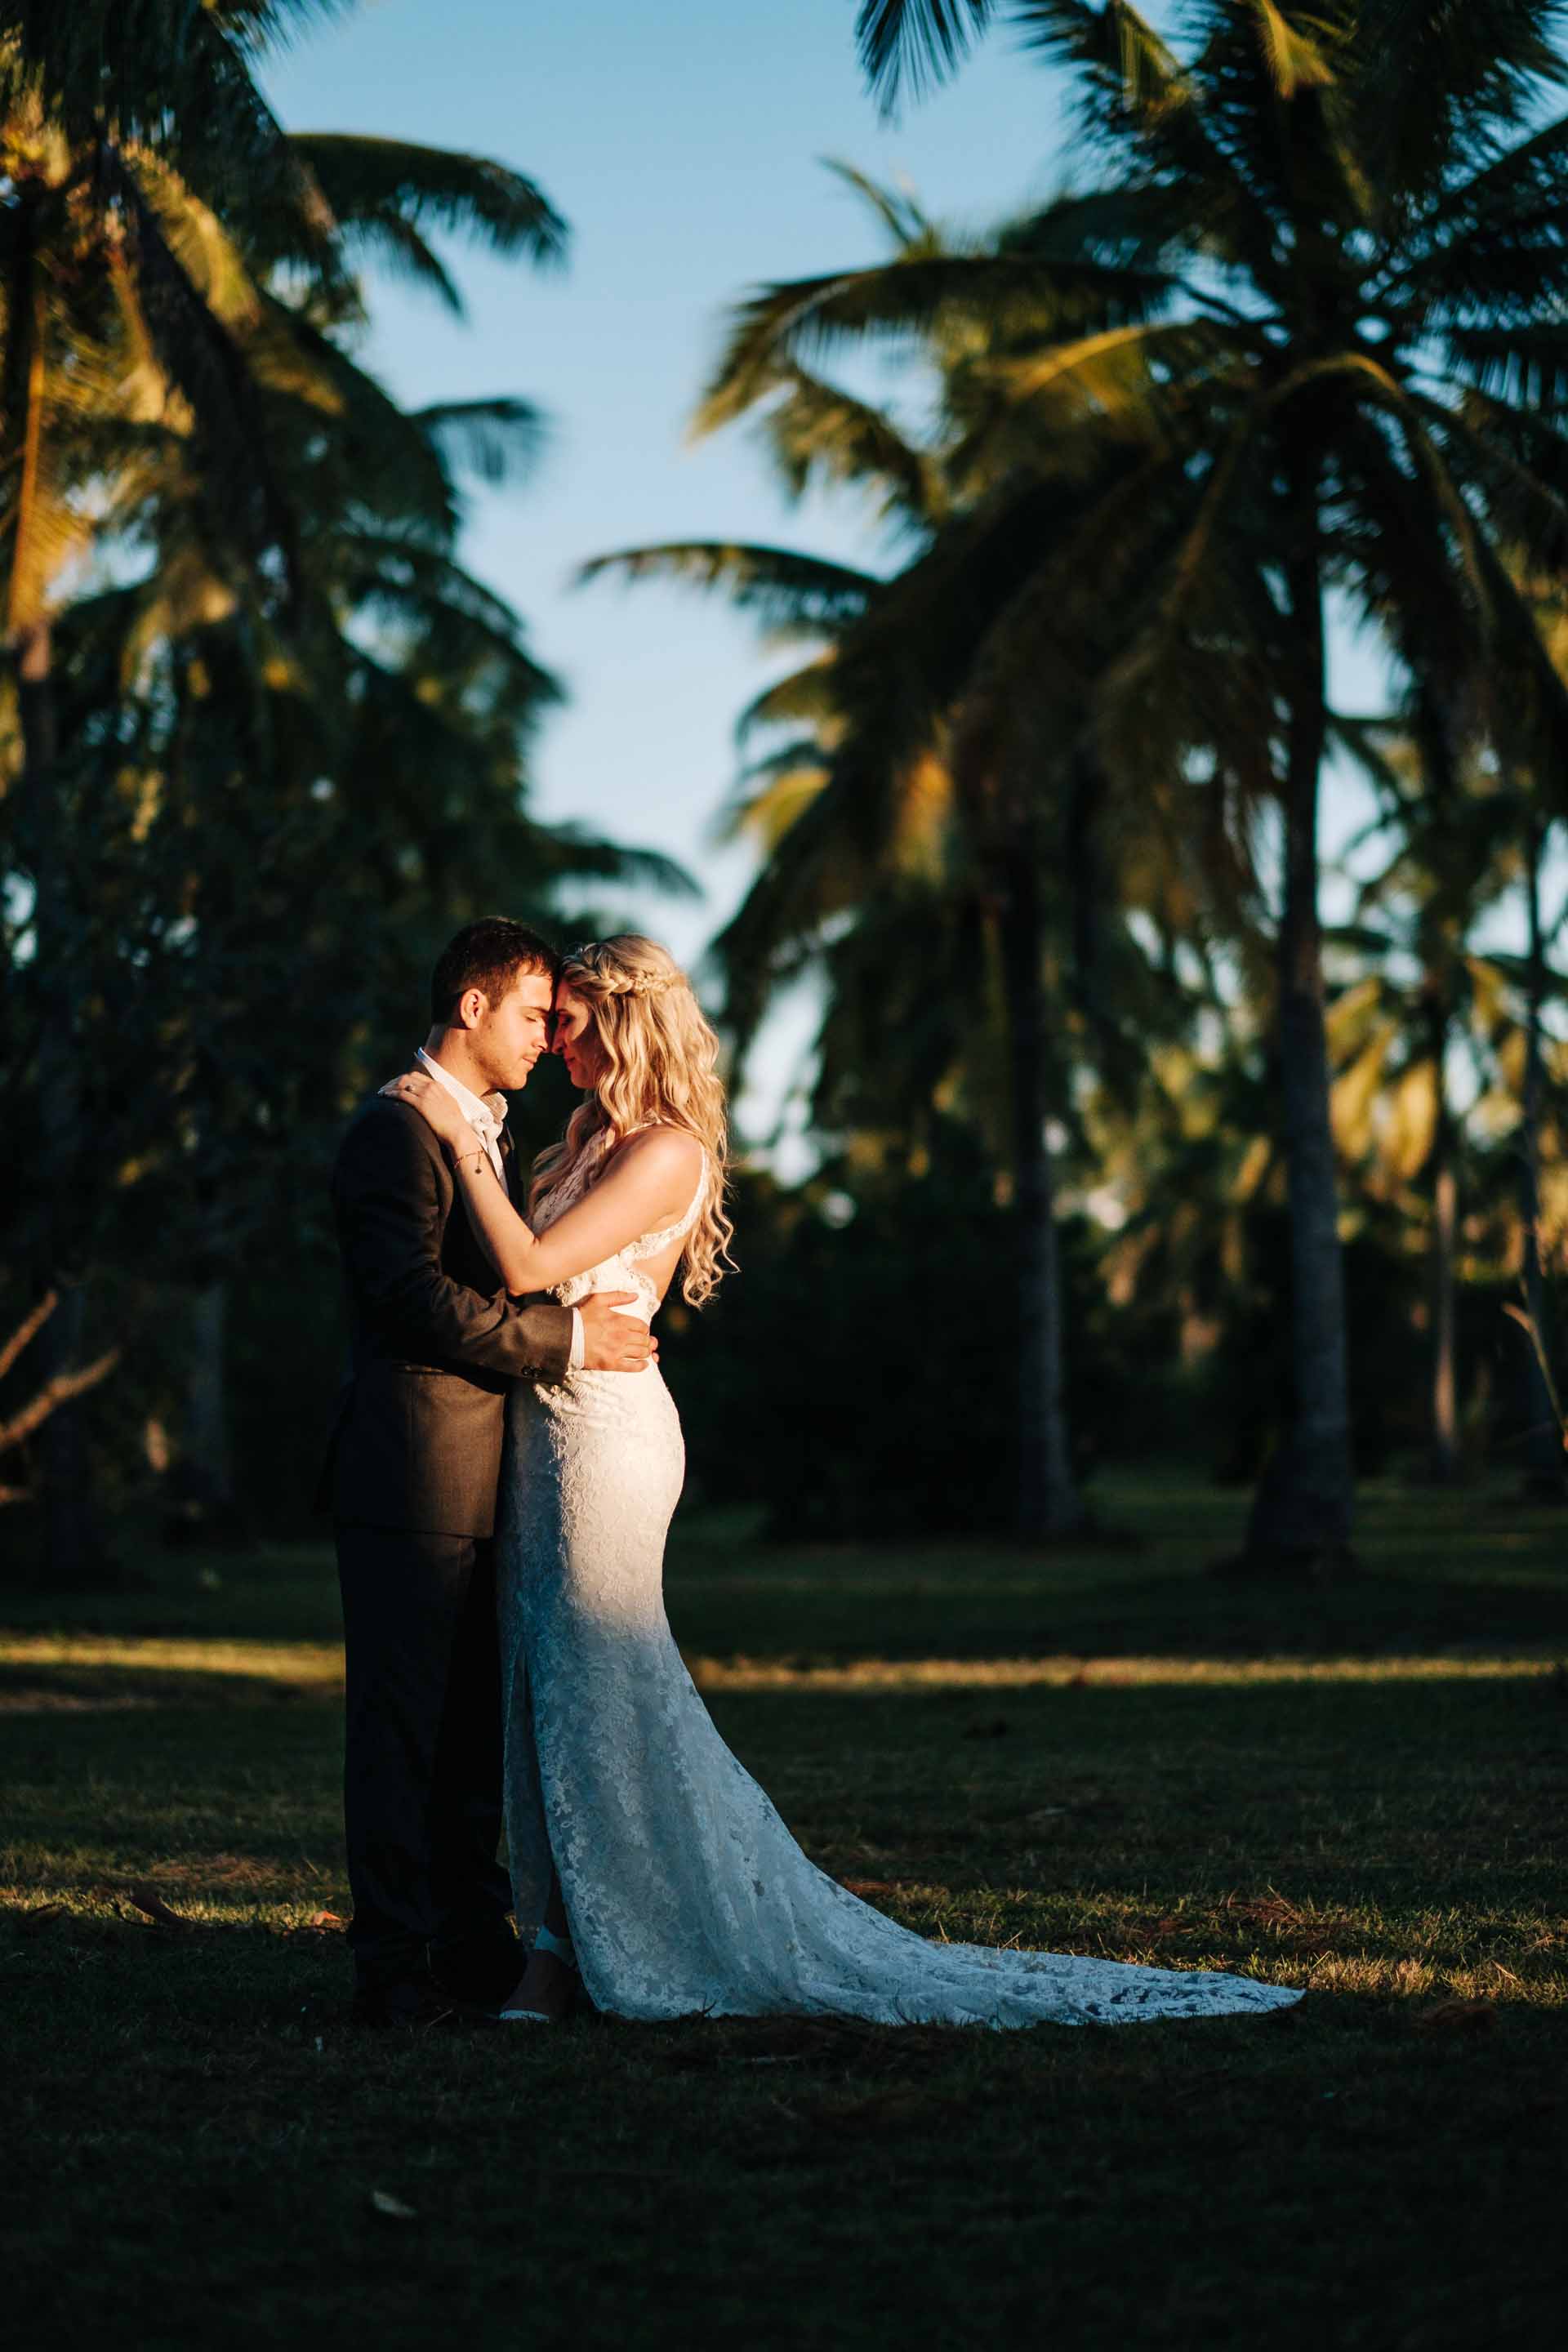 full length portrait of the bride and groom resting their bodies together between rows of coconut trees